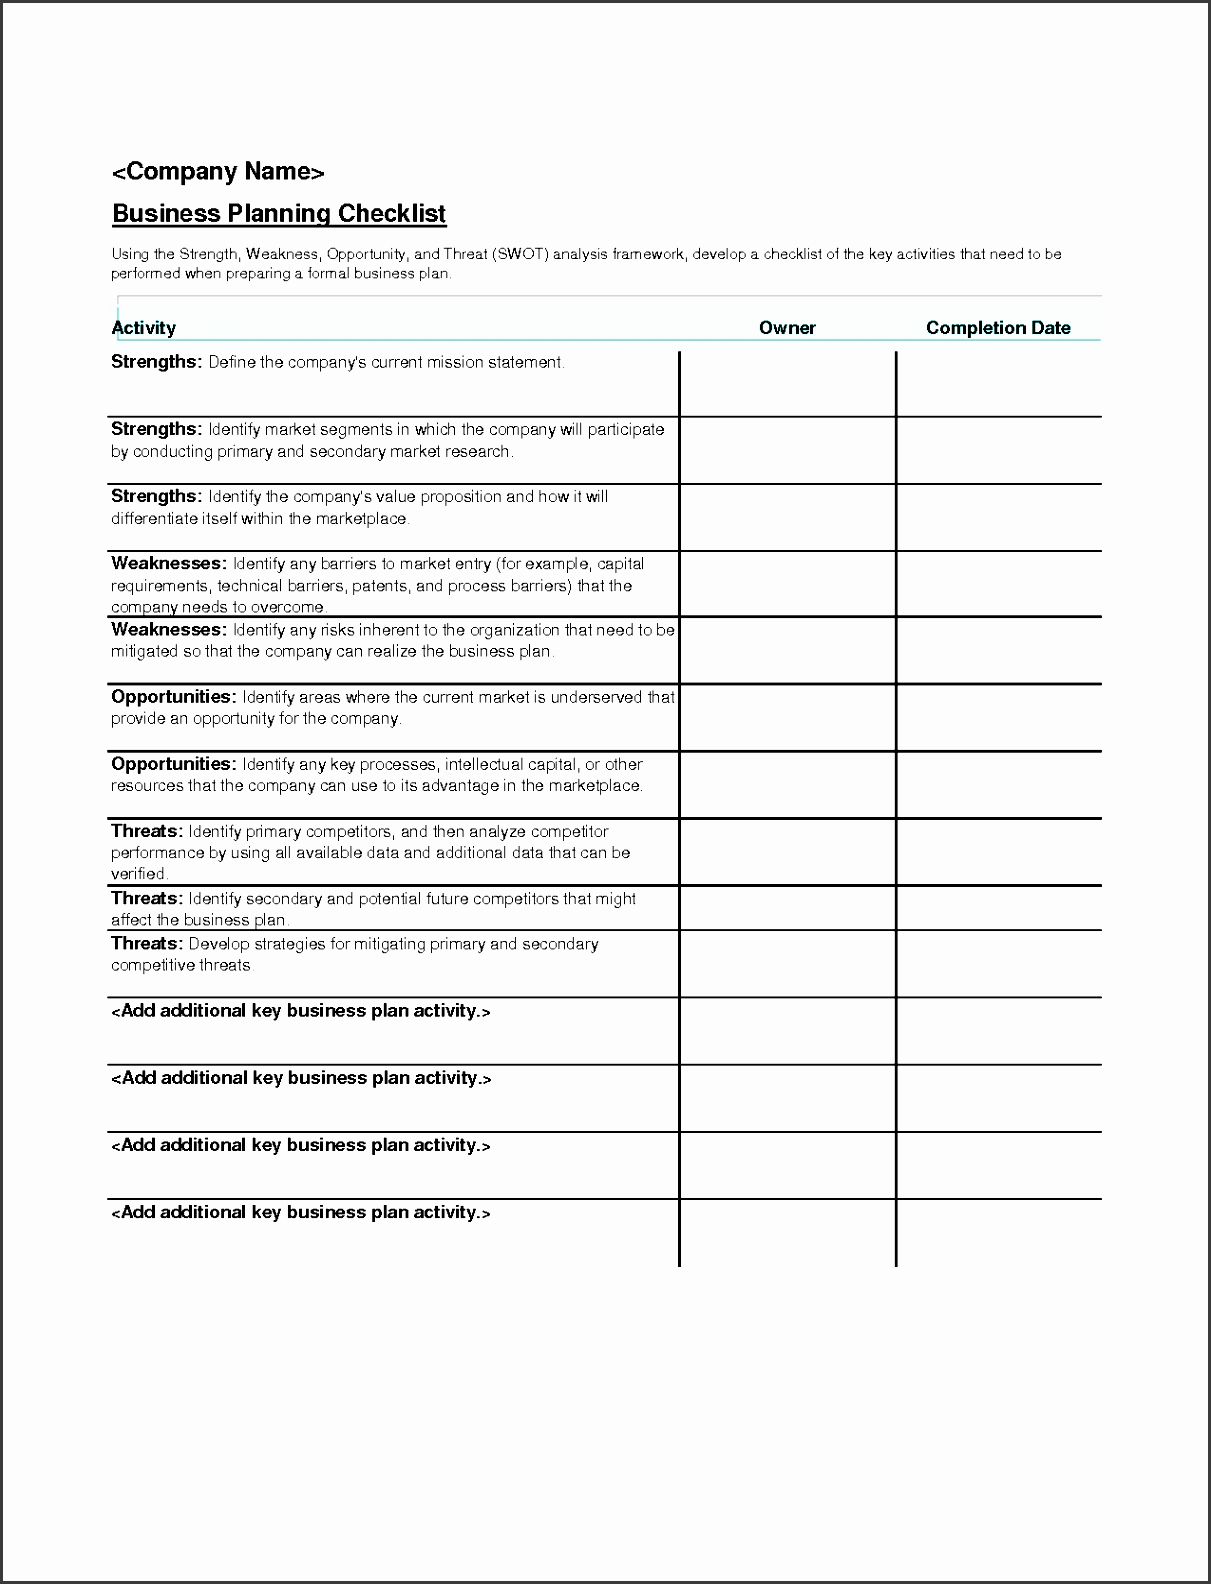 Meeting Planner Checklist Template Beautiful 6 Conference Planning Checklist Outline Sampletemplatess